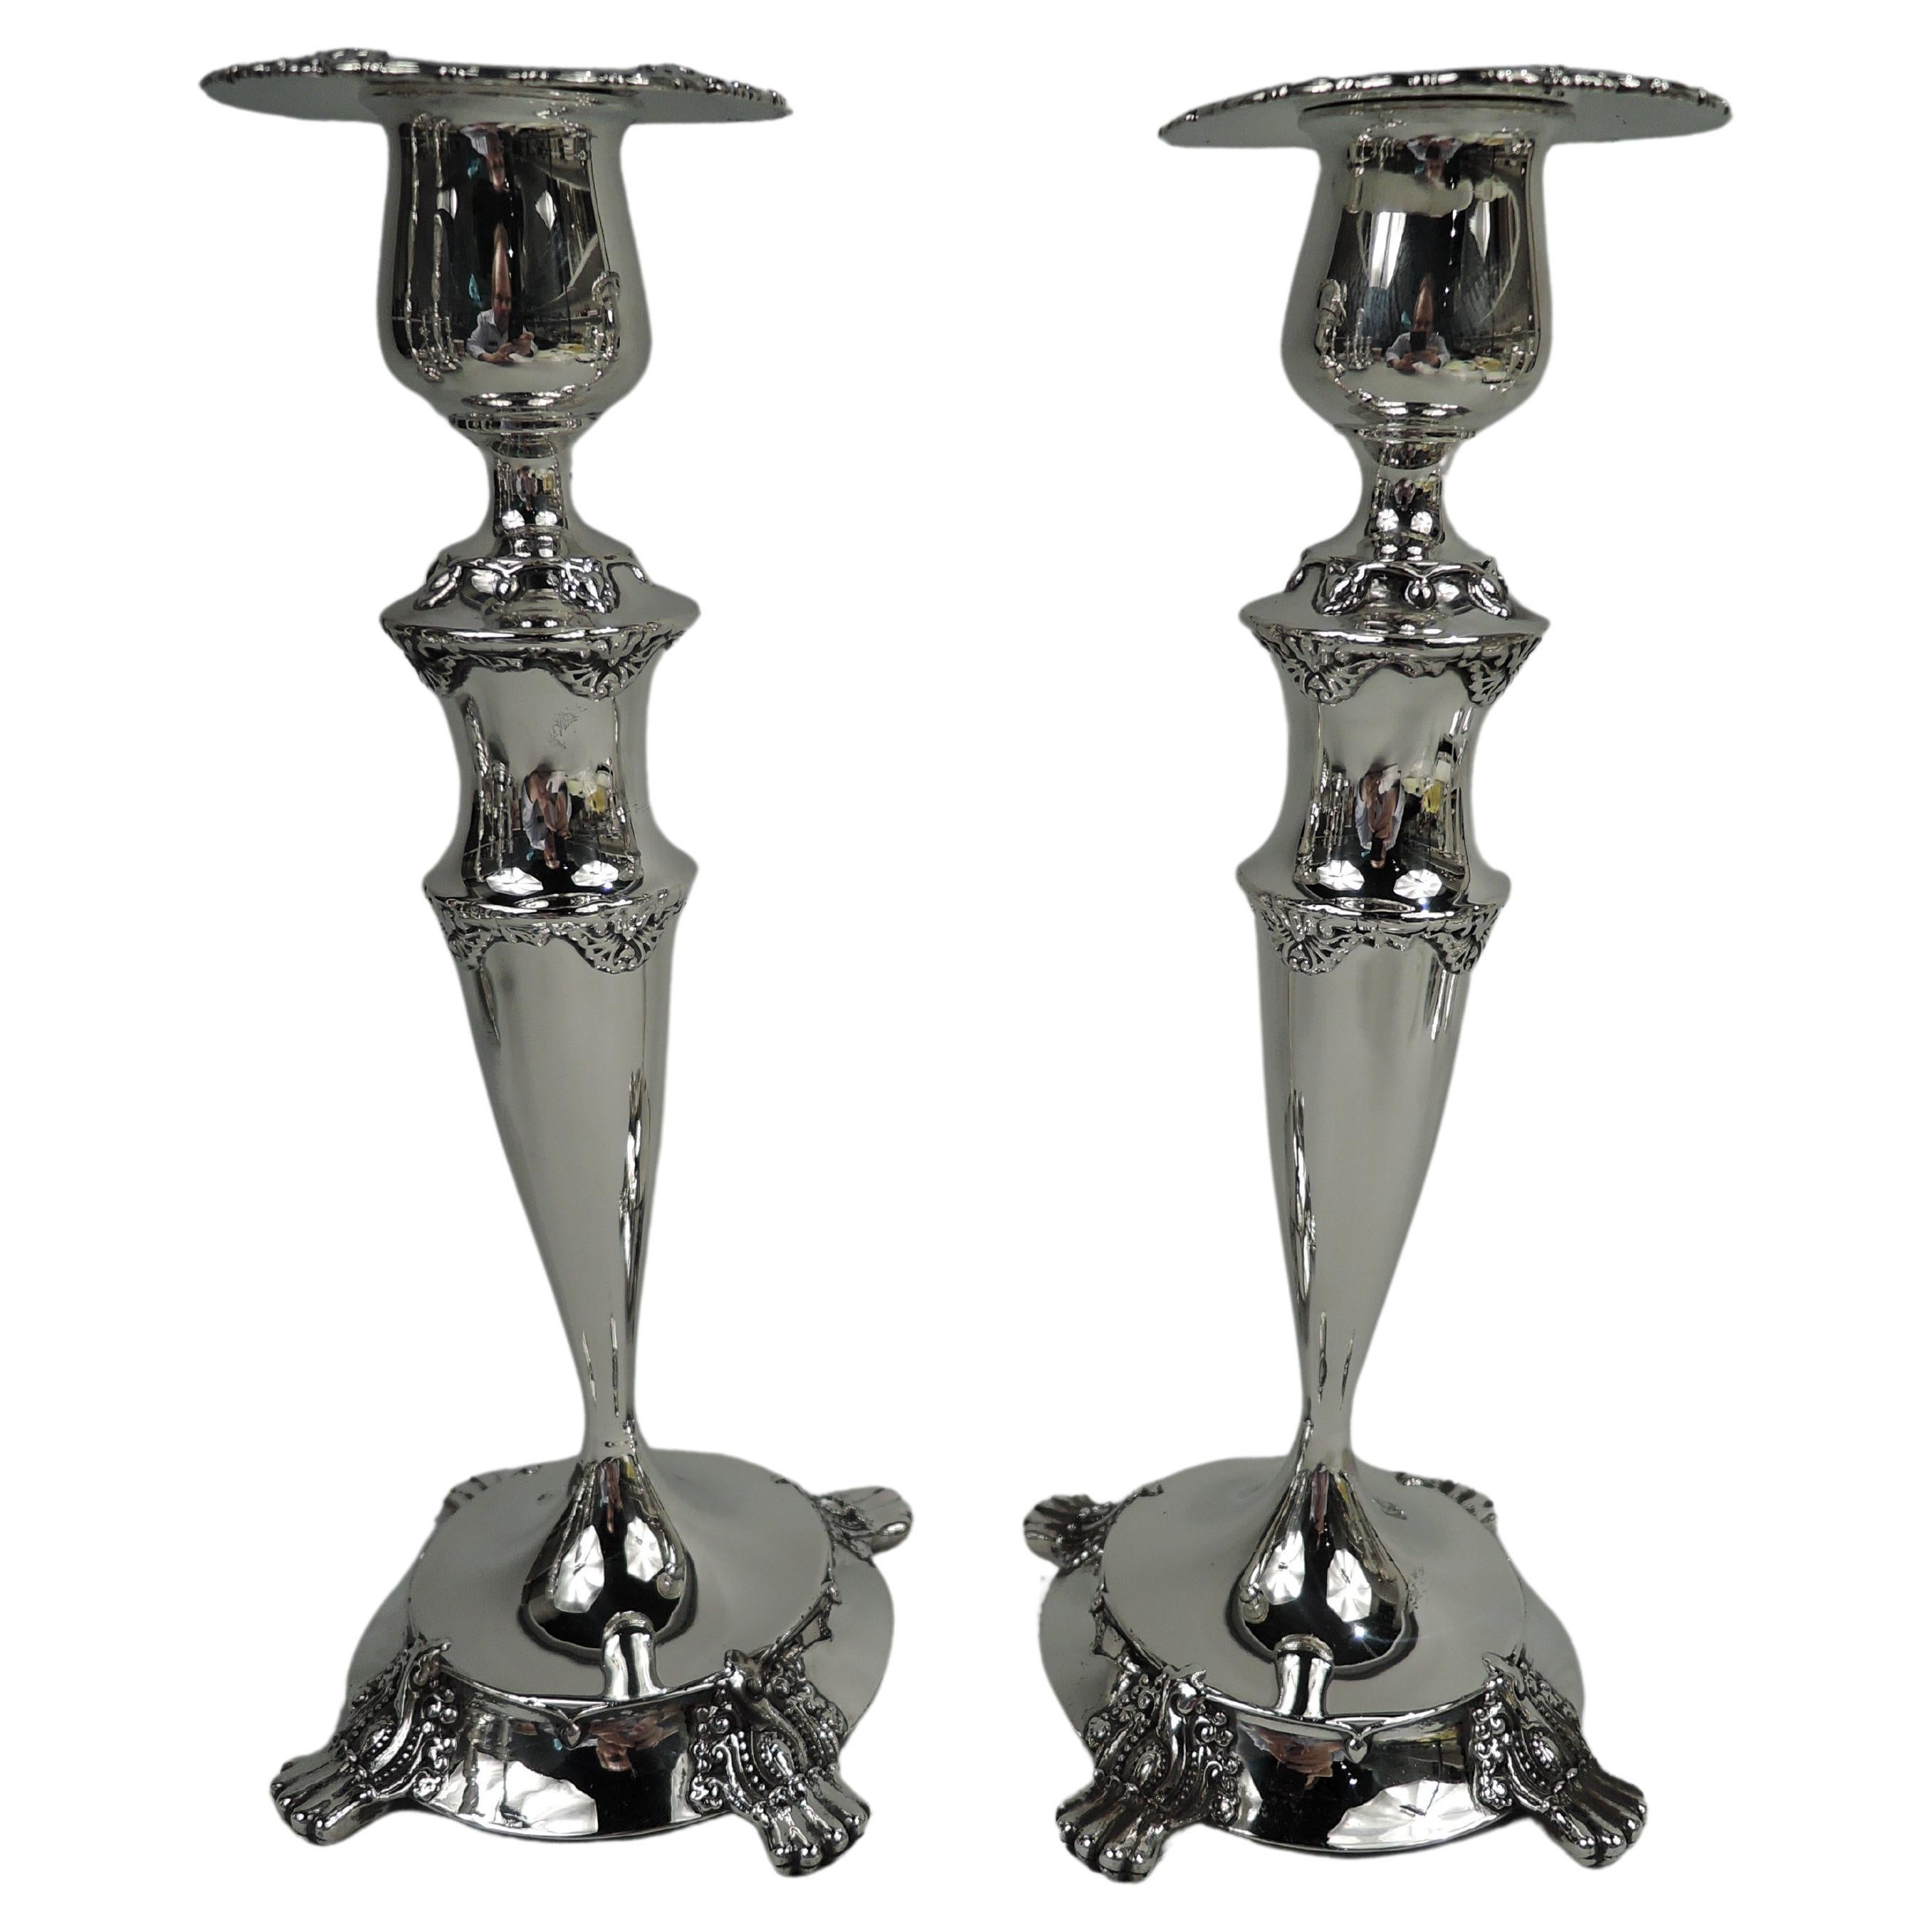 Pair of Antique Tiffany Edwardian Classical Sterling Silver Candlesticks